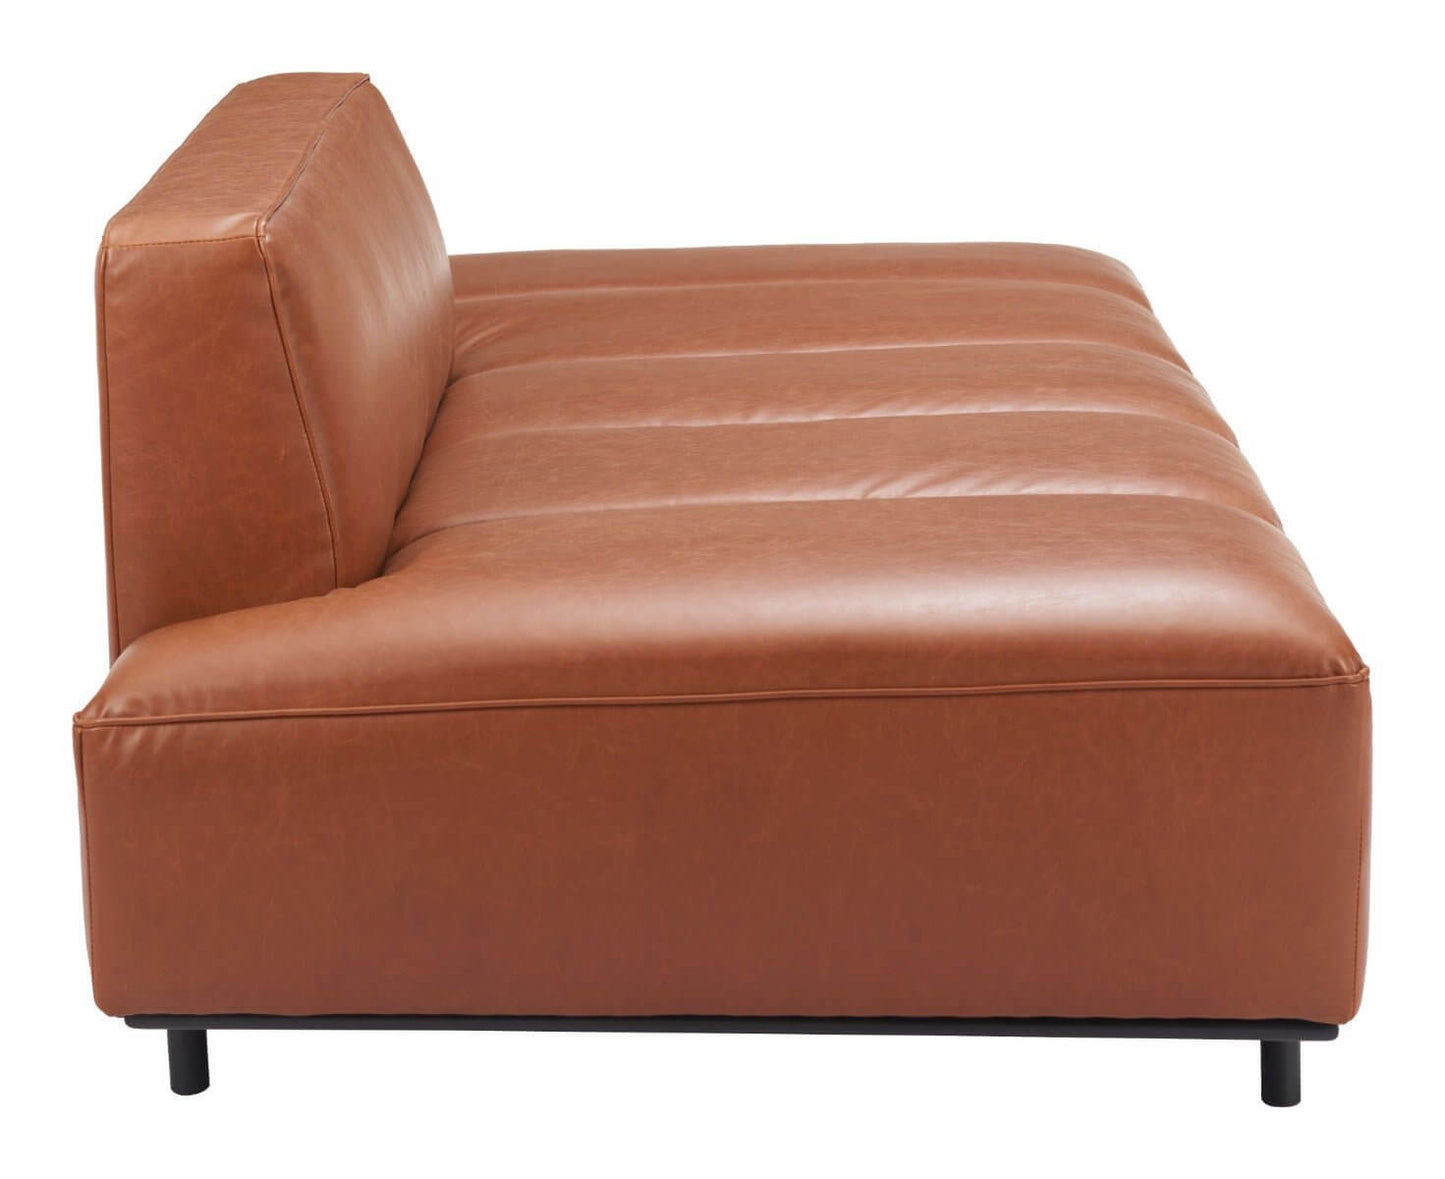 Confection Faux Leather Sofa Couch Day Bed 79" - Revel Sofa 